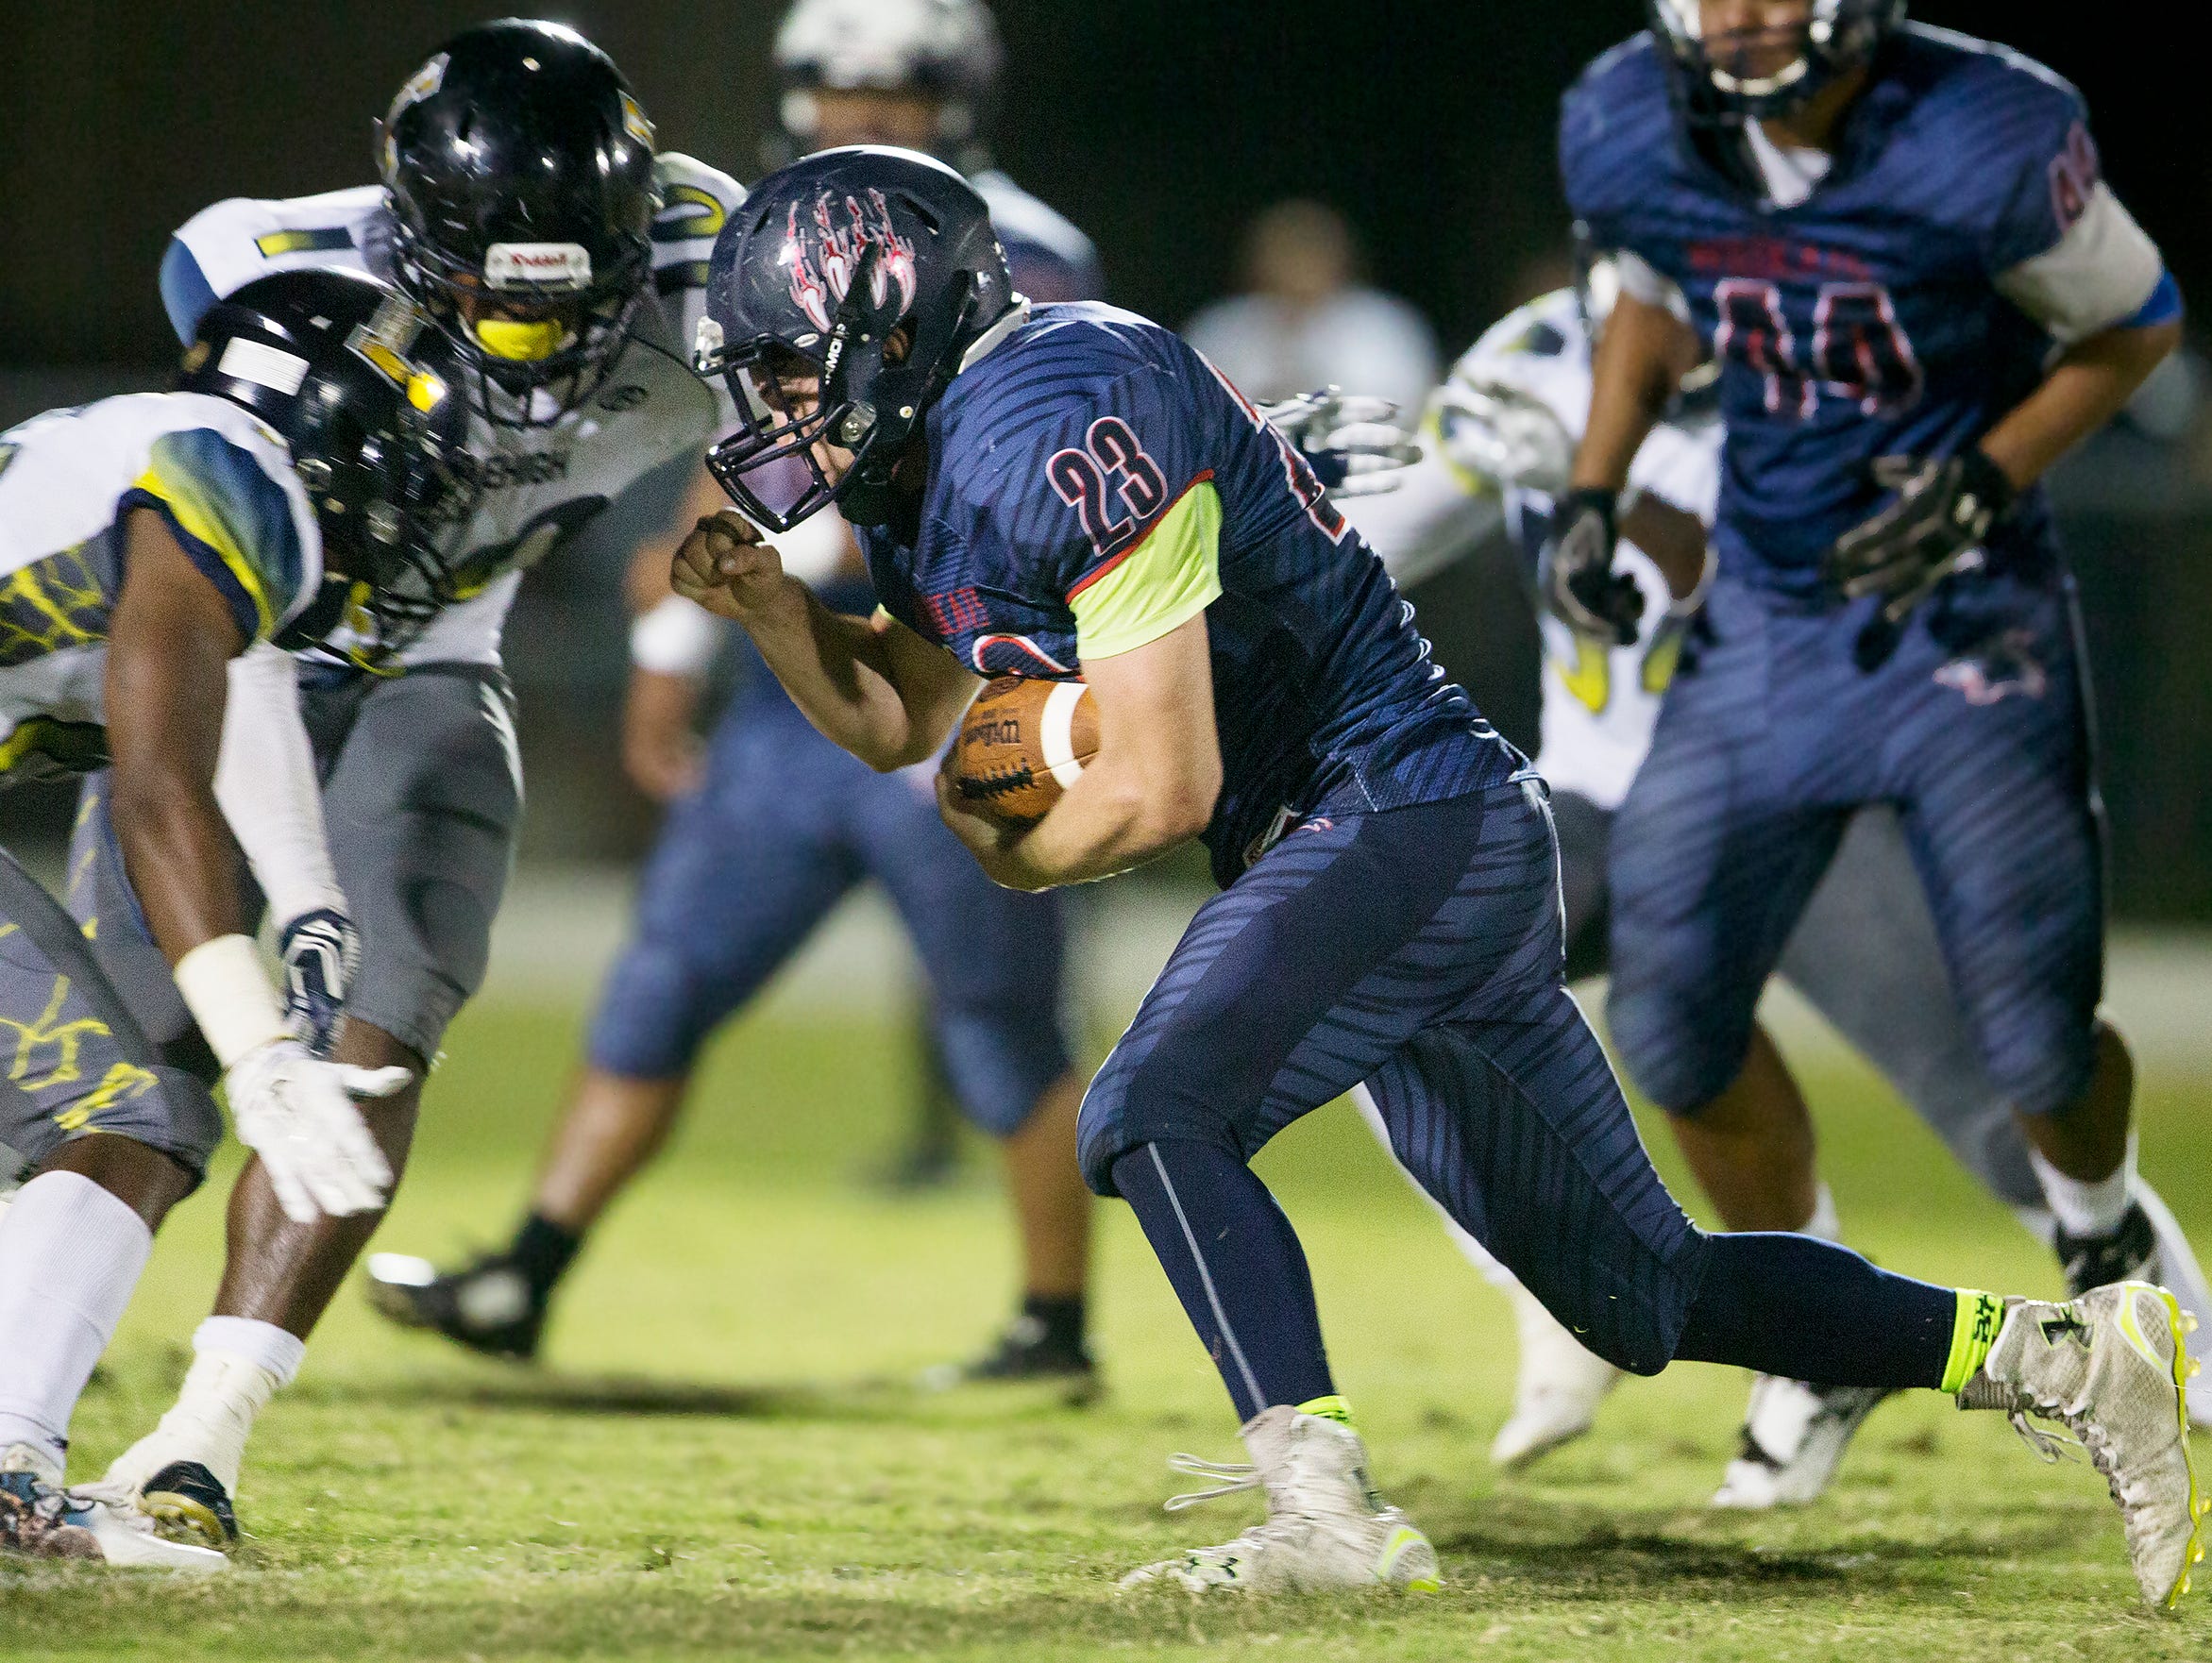 Estero High School’s Jonathan Rauss takes on Lehigh defenders during second quarter play on Friday at Estero High School.